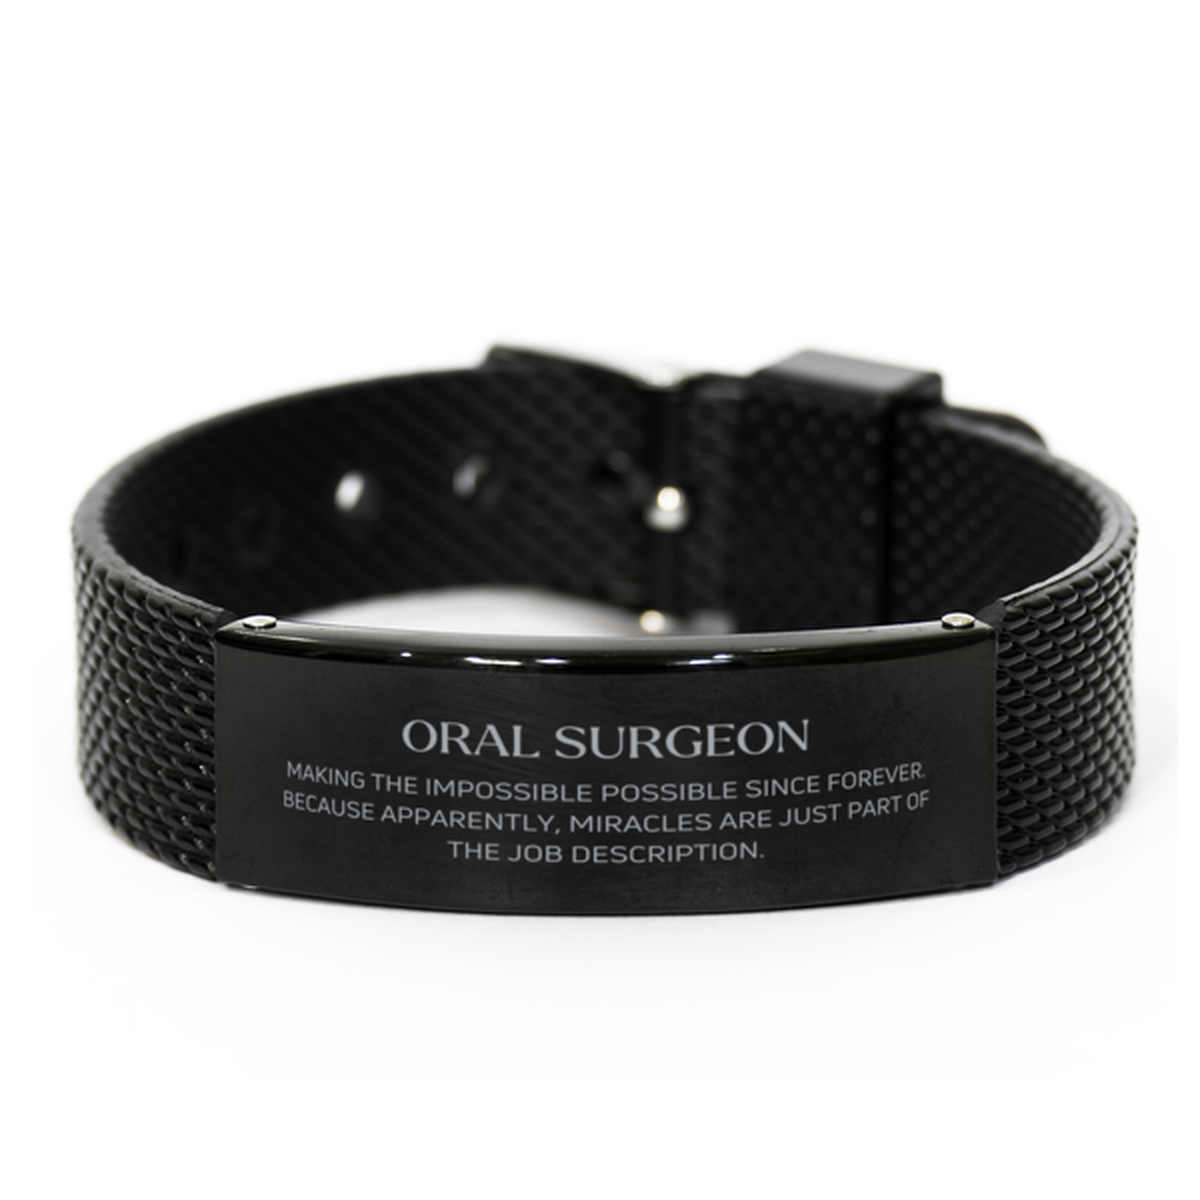 Funny Oral Surgeon Gifts, Miracles are just part of the job description, Inspirational Birthday Black Shark Mesh Bracelet For Oral Surgeon, Men, Women, Coworkers, Friends, Boss